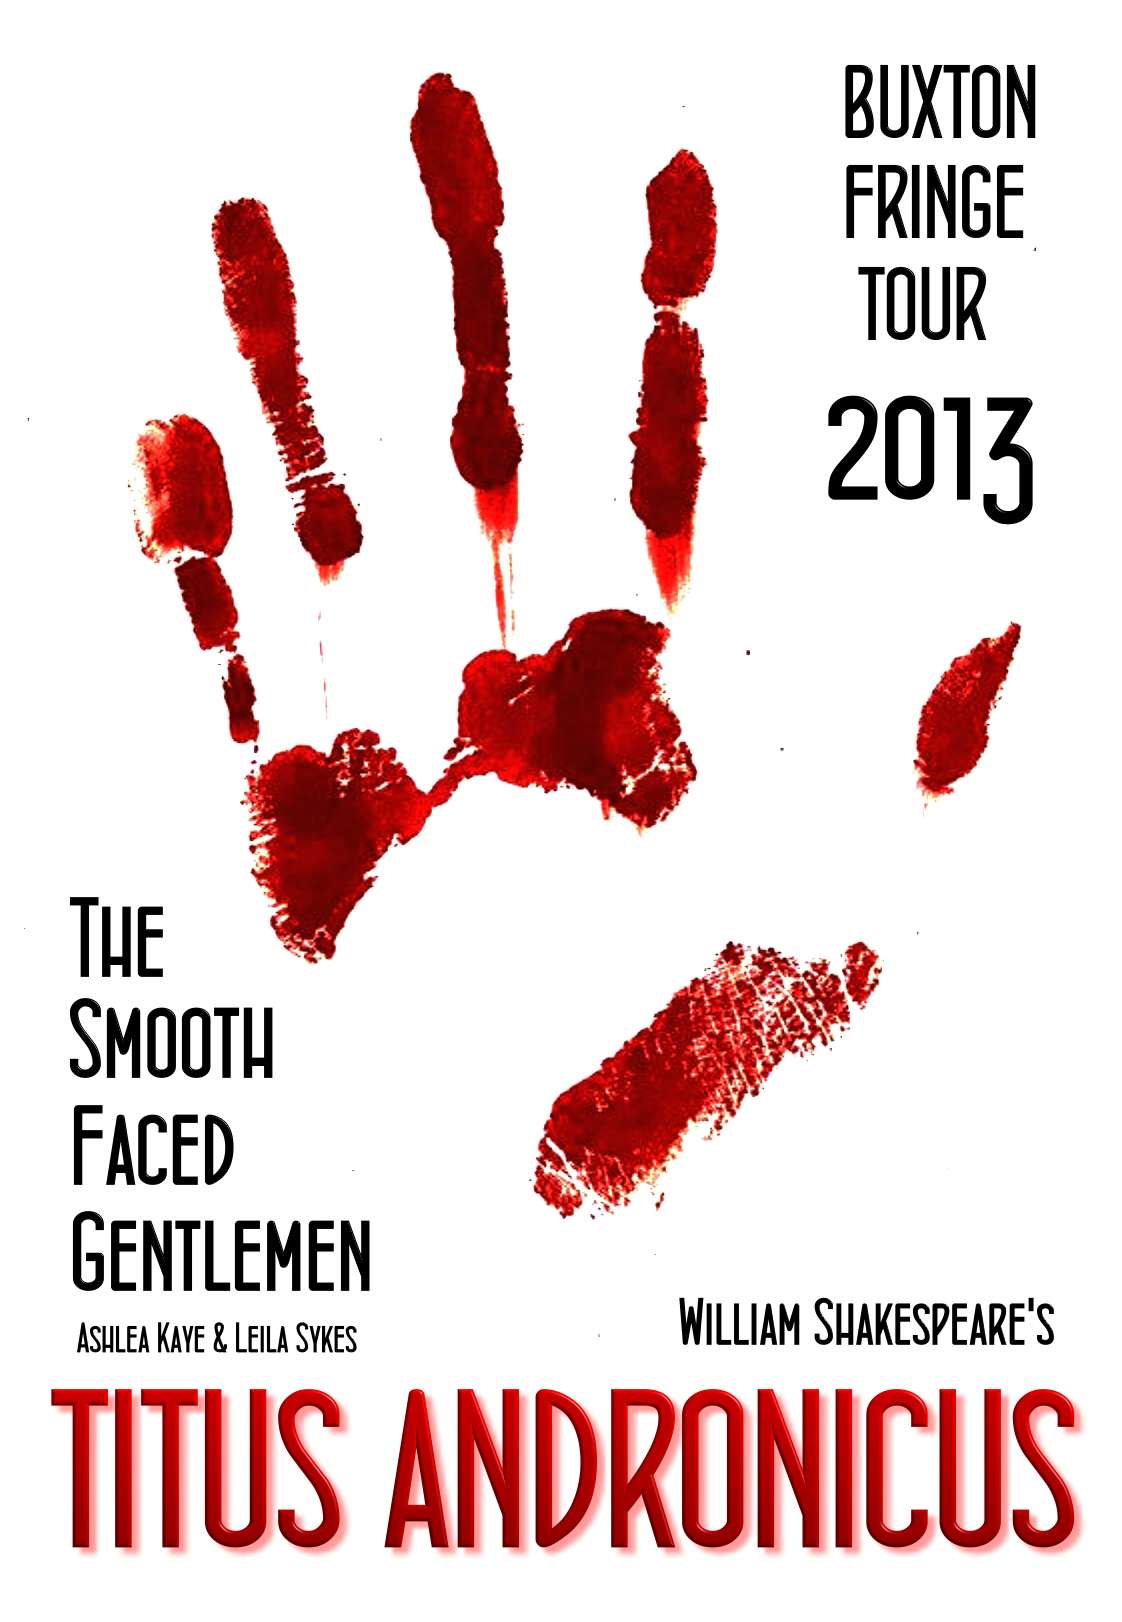 Titus Andronicus 2013 UK tour, The Edinburgh and Buxton Fringe, Smooth Faced Gentlemen